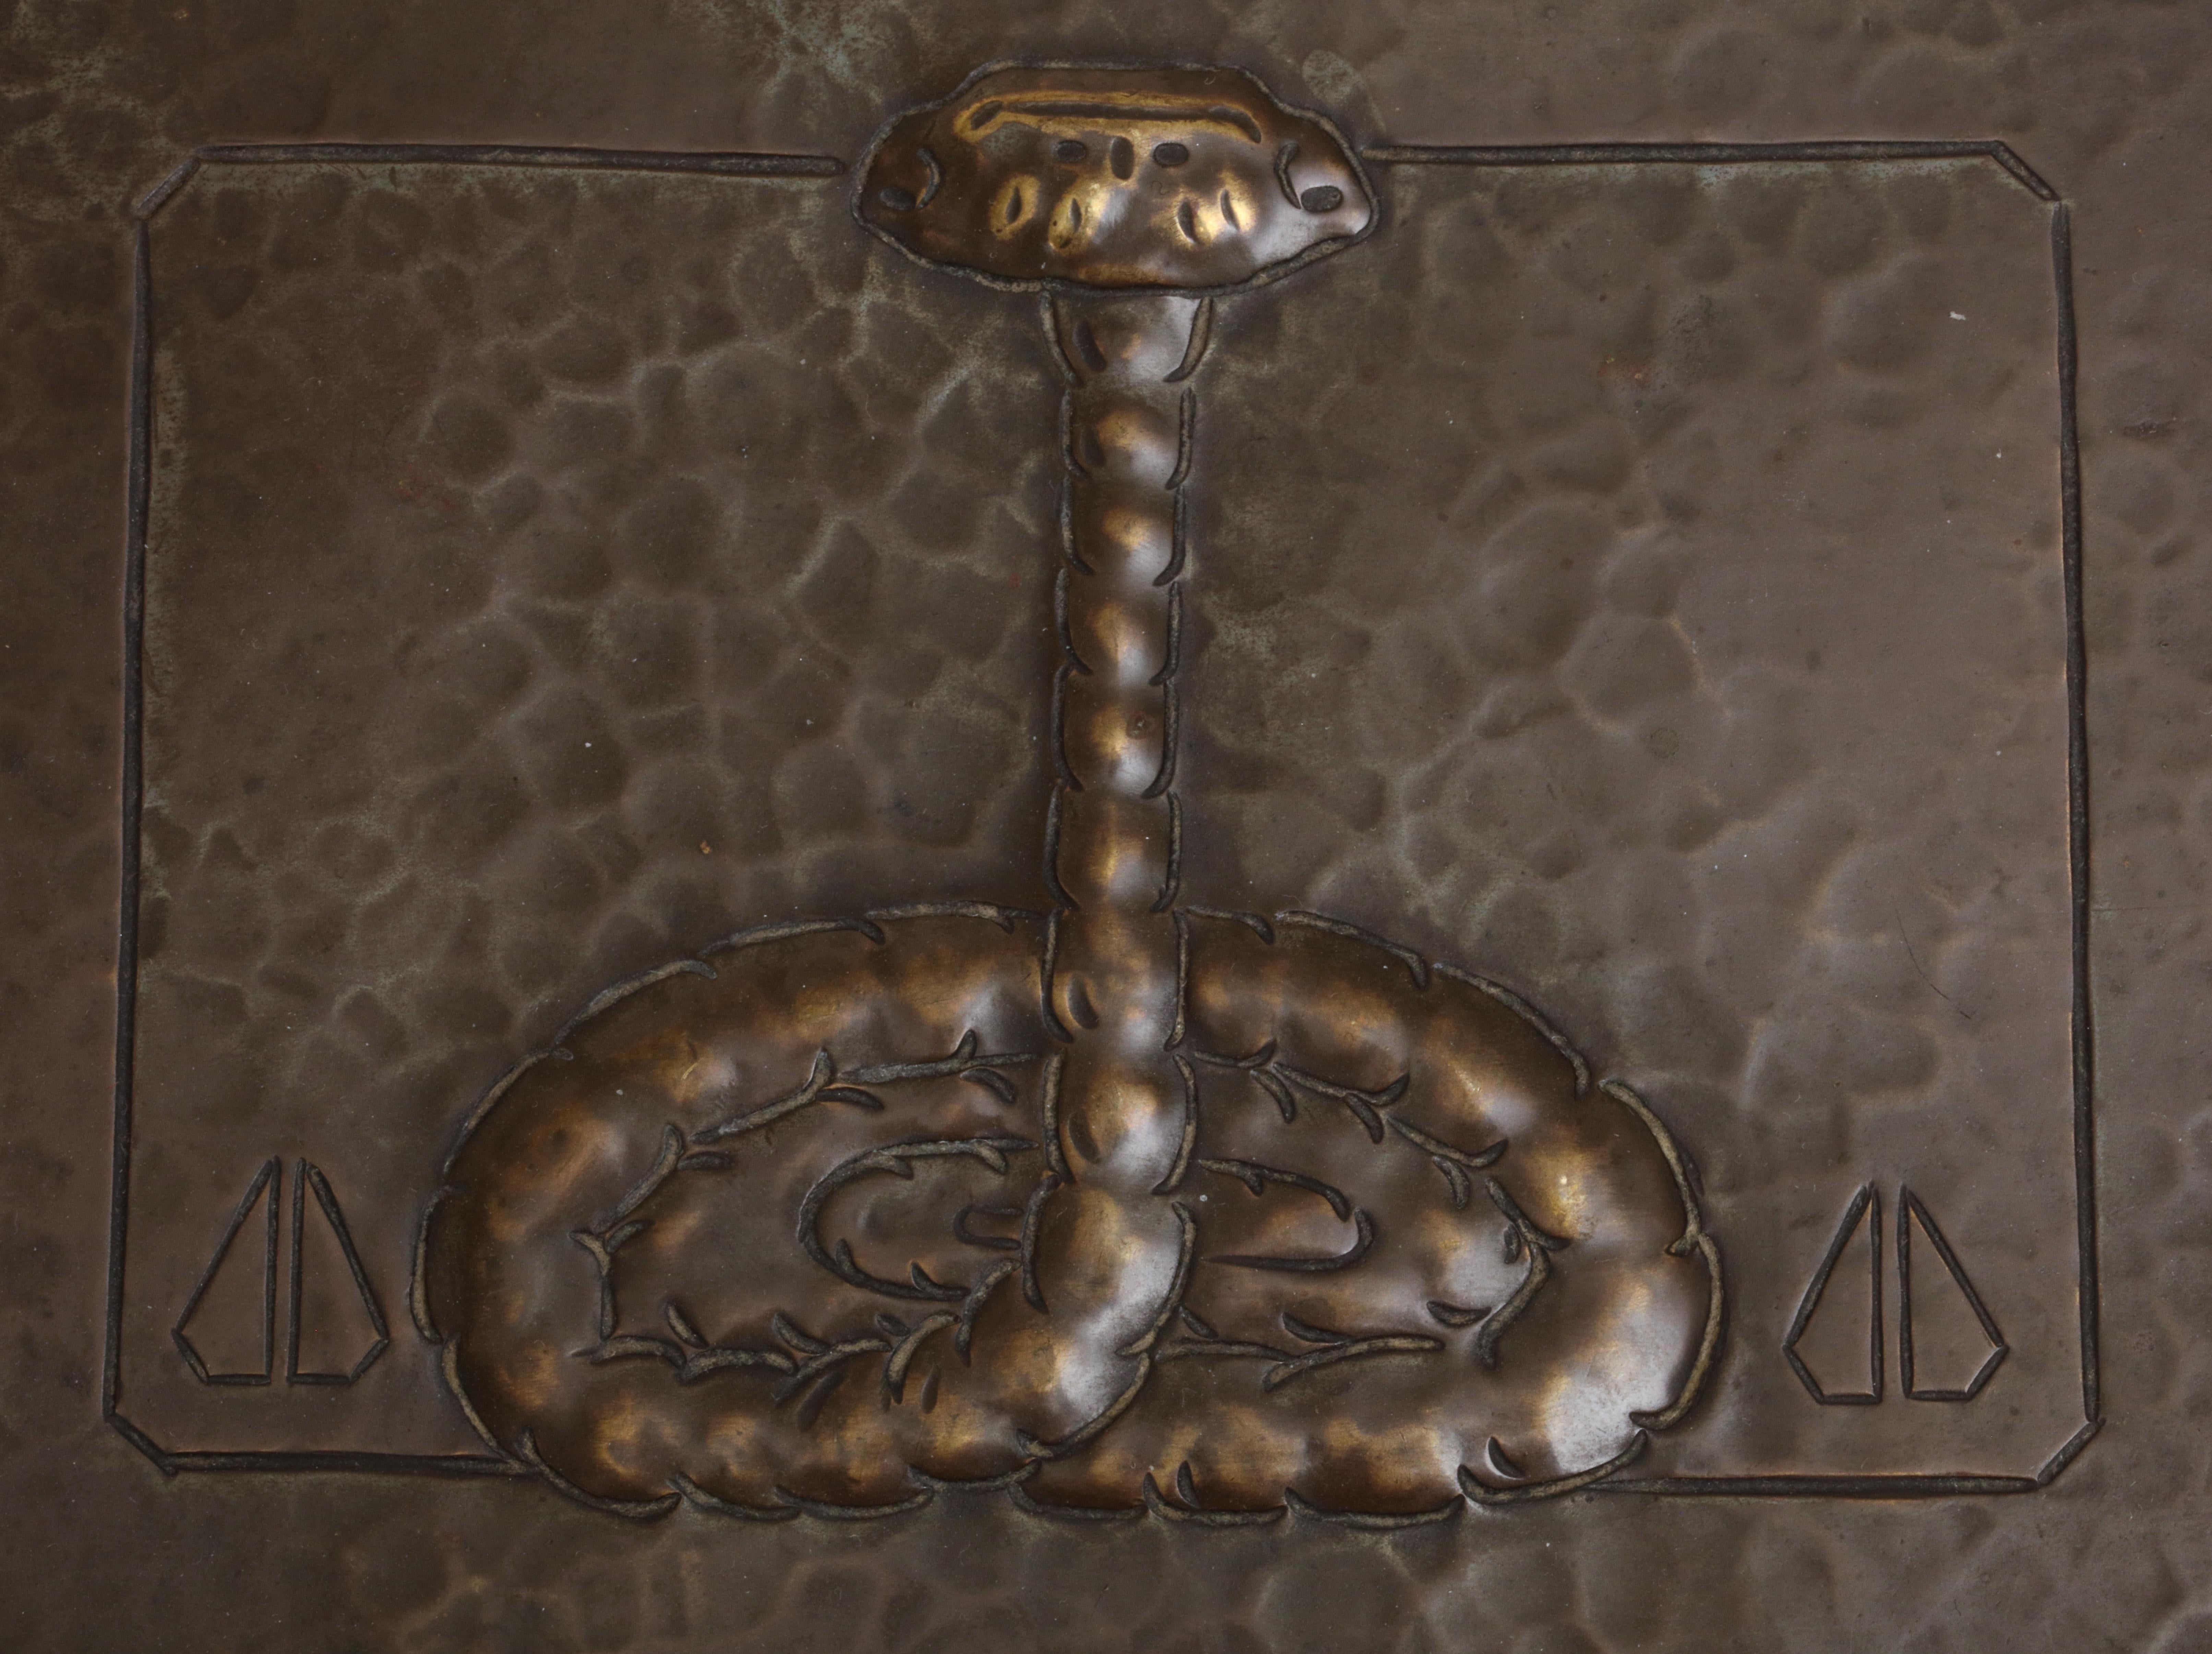 Continental Art Deco Hinged Bronze Box with Elevated Snake Design im Zustand „Gut“ im Angebot in New York, NY